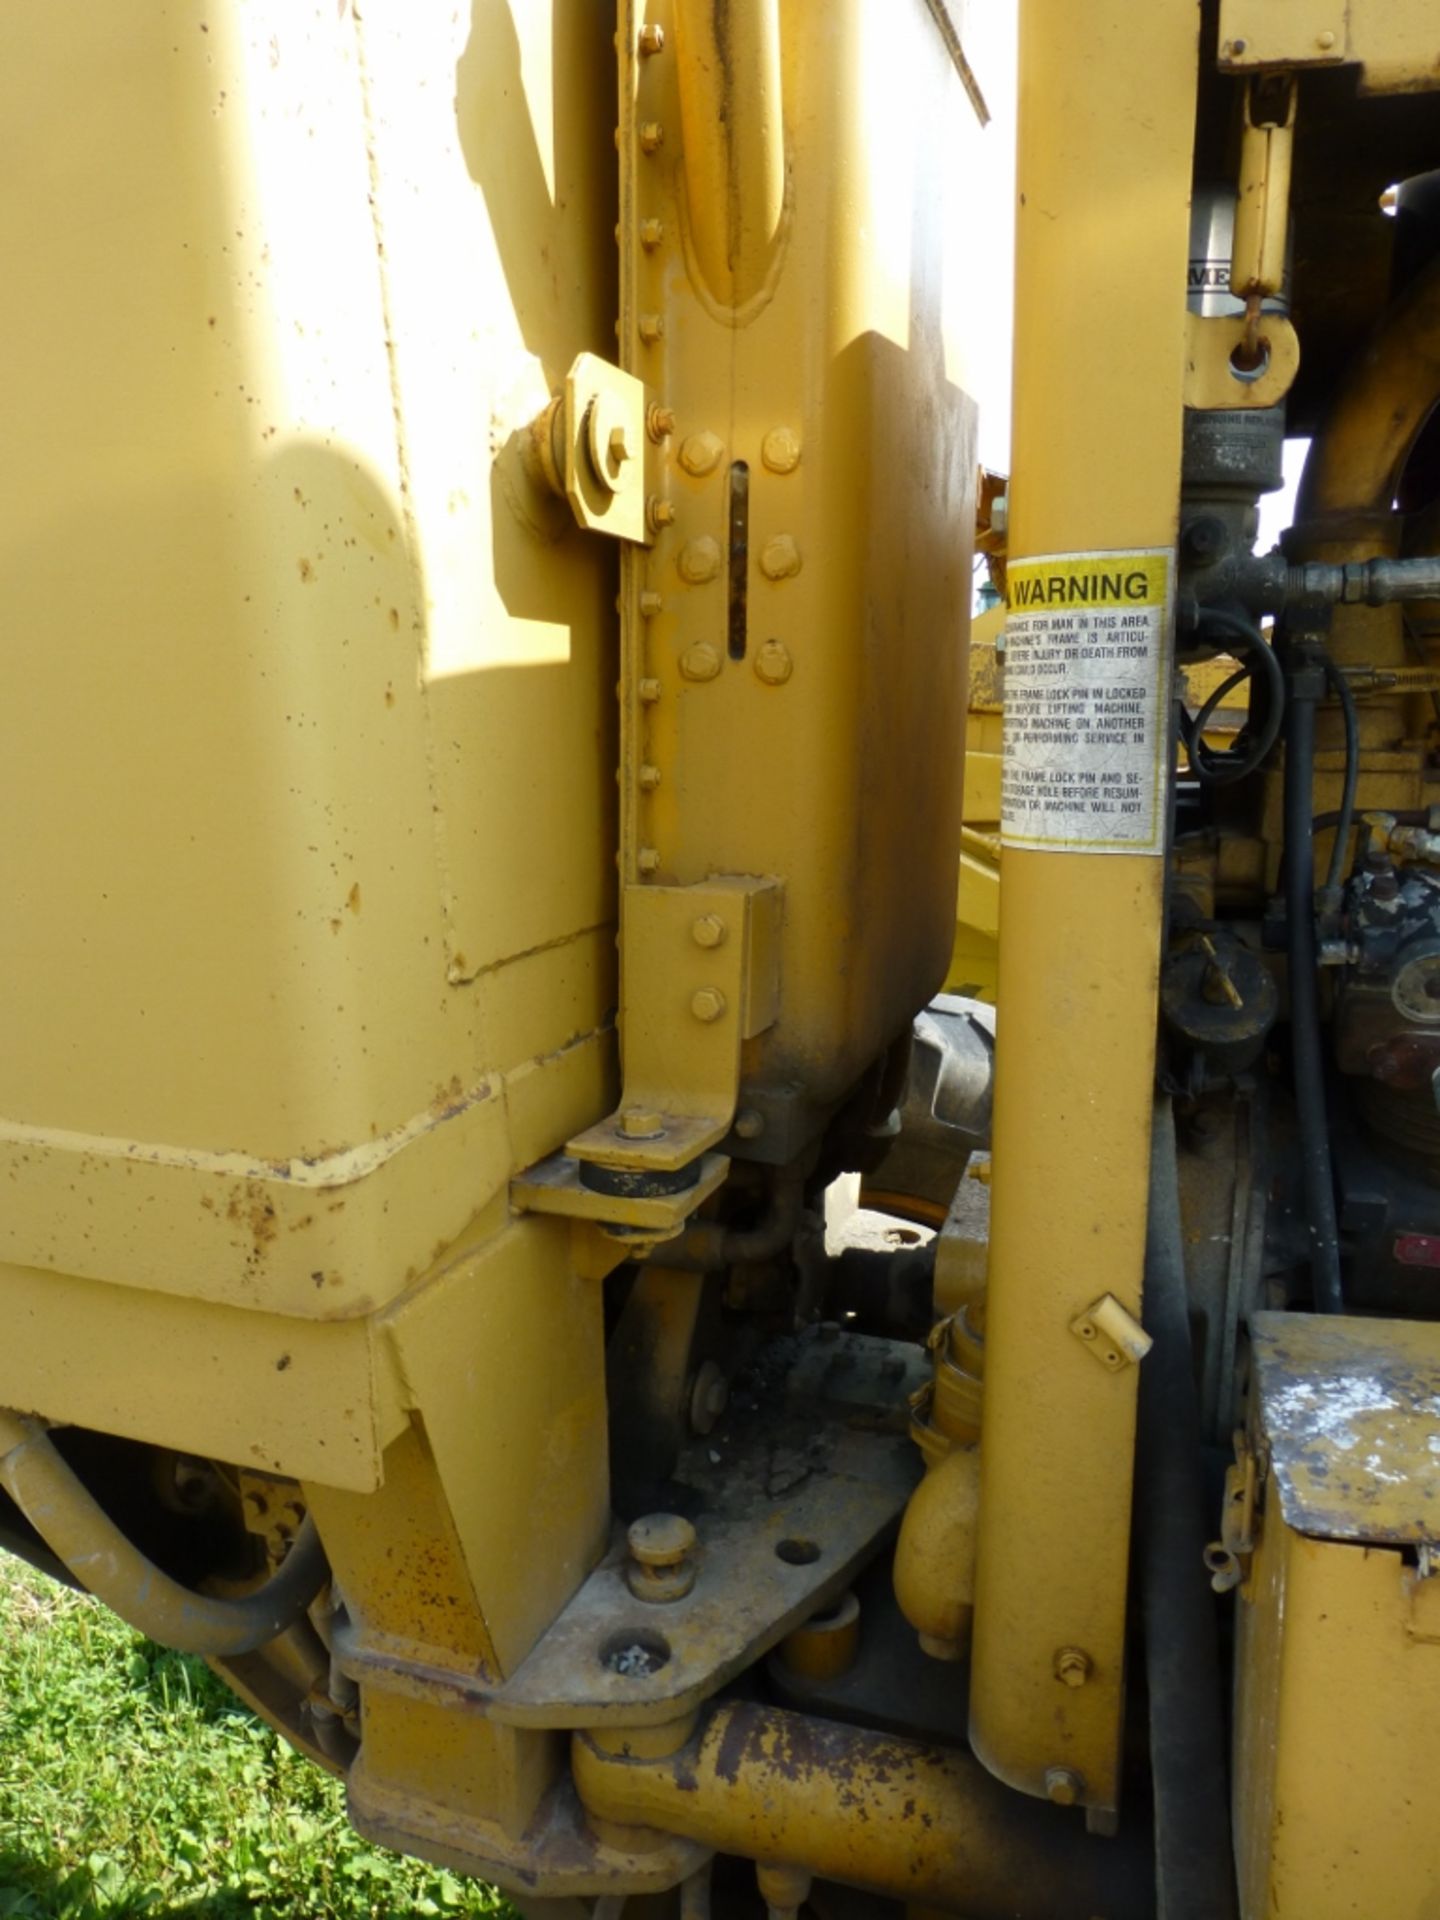 Caterpillar 120G motor grader with 13'10" moldboard se:87v871. Power shift. 7720 unverified hrs. - Image 5 of 27